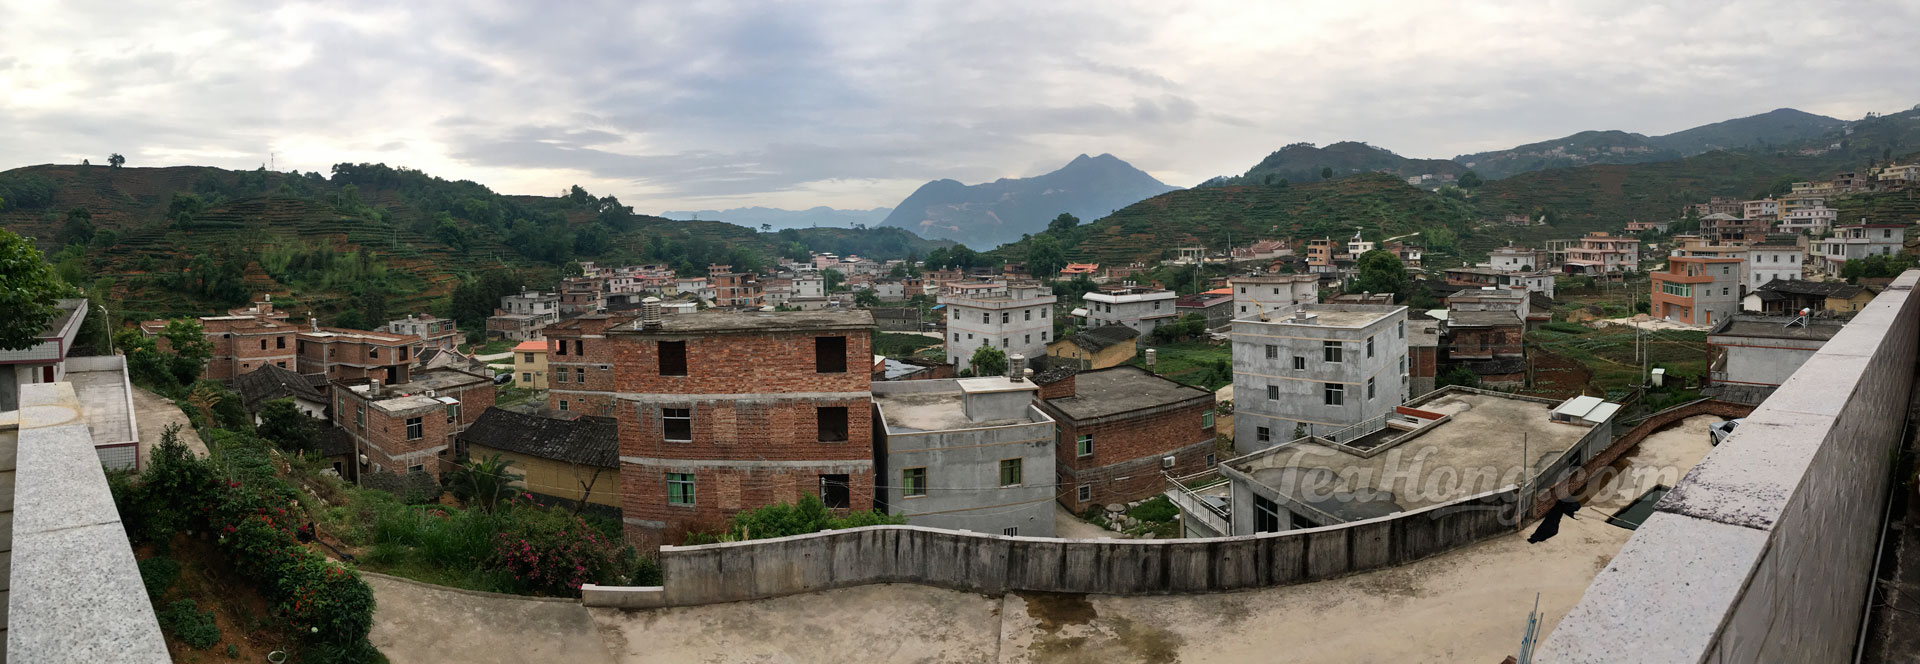 The village of Xiping from the roog of the Wang's